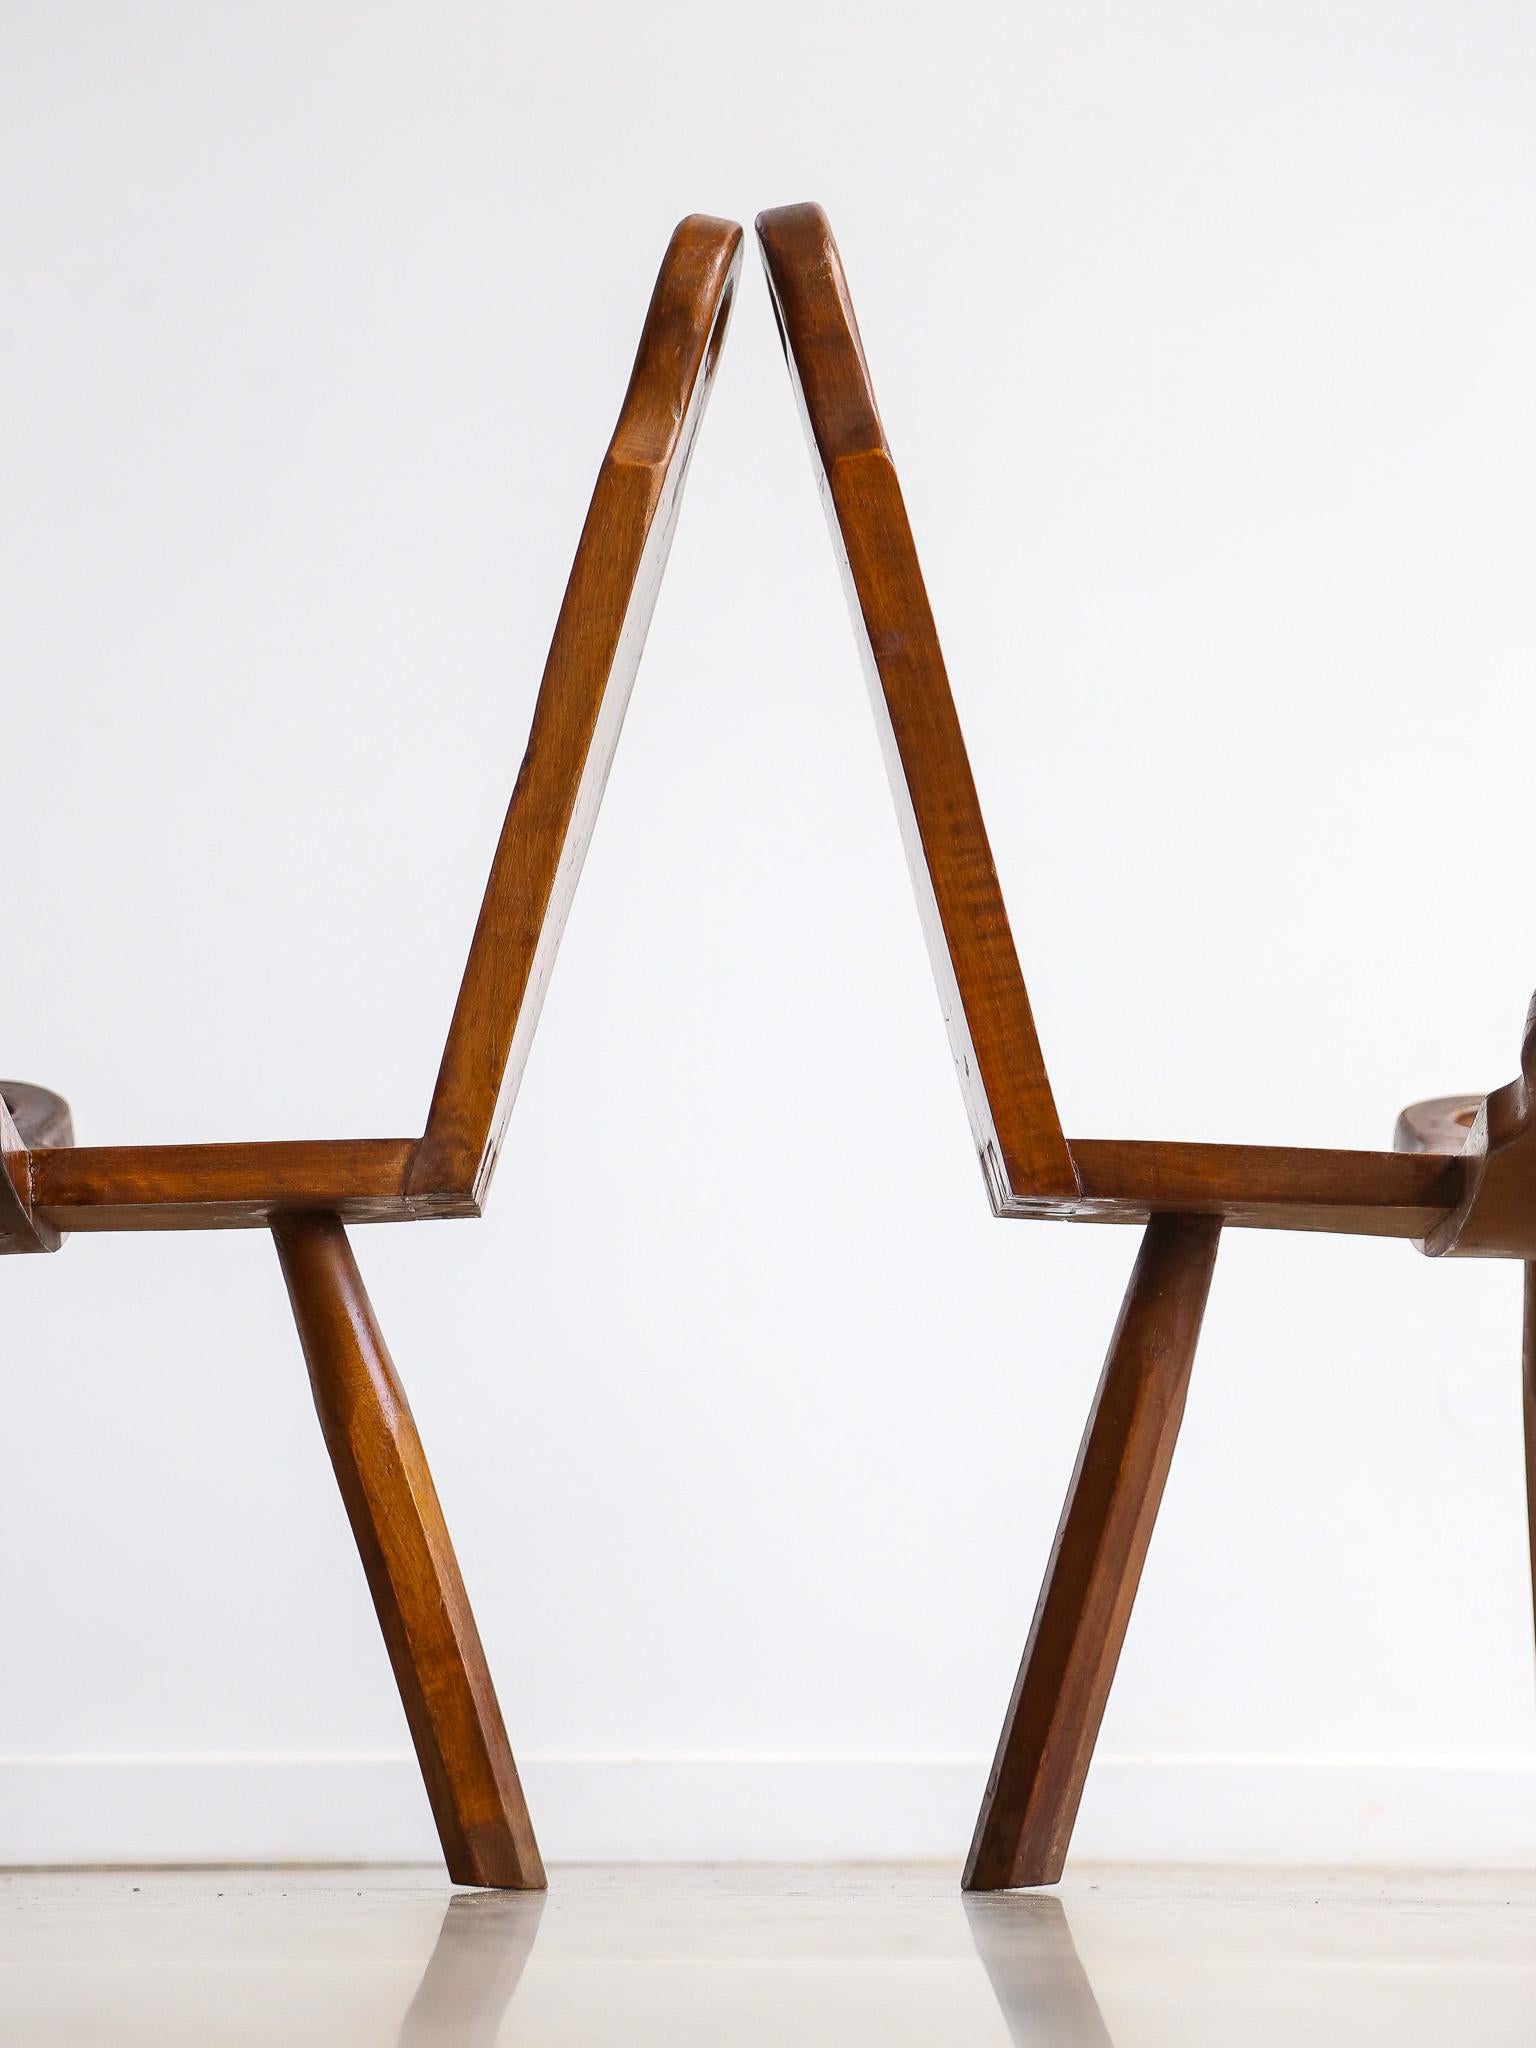 Hand-Crafted Brutalist Spanish Midcentury Sculptural Tripod Chair For Sale